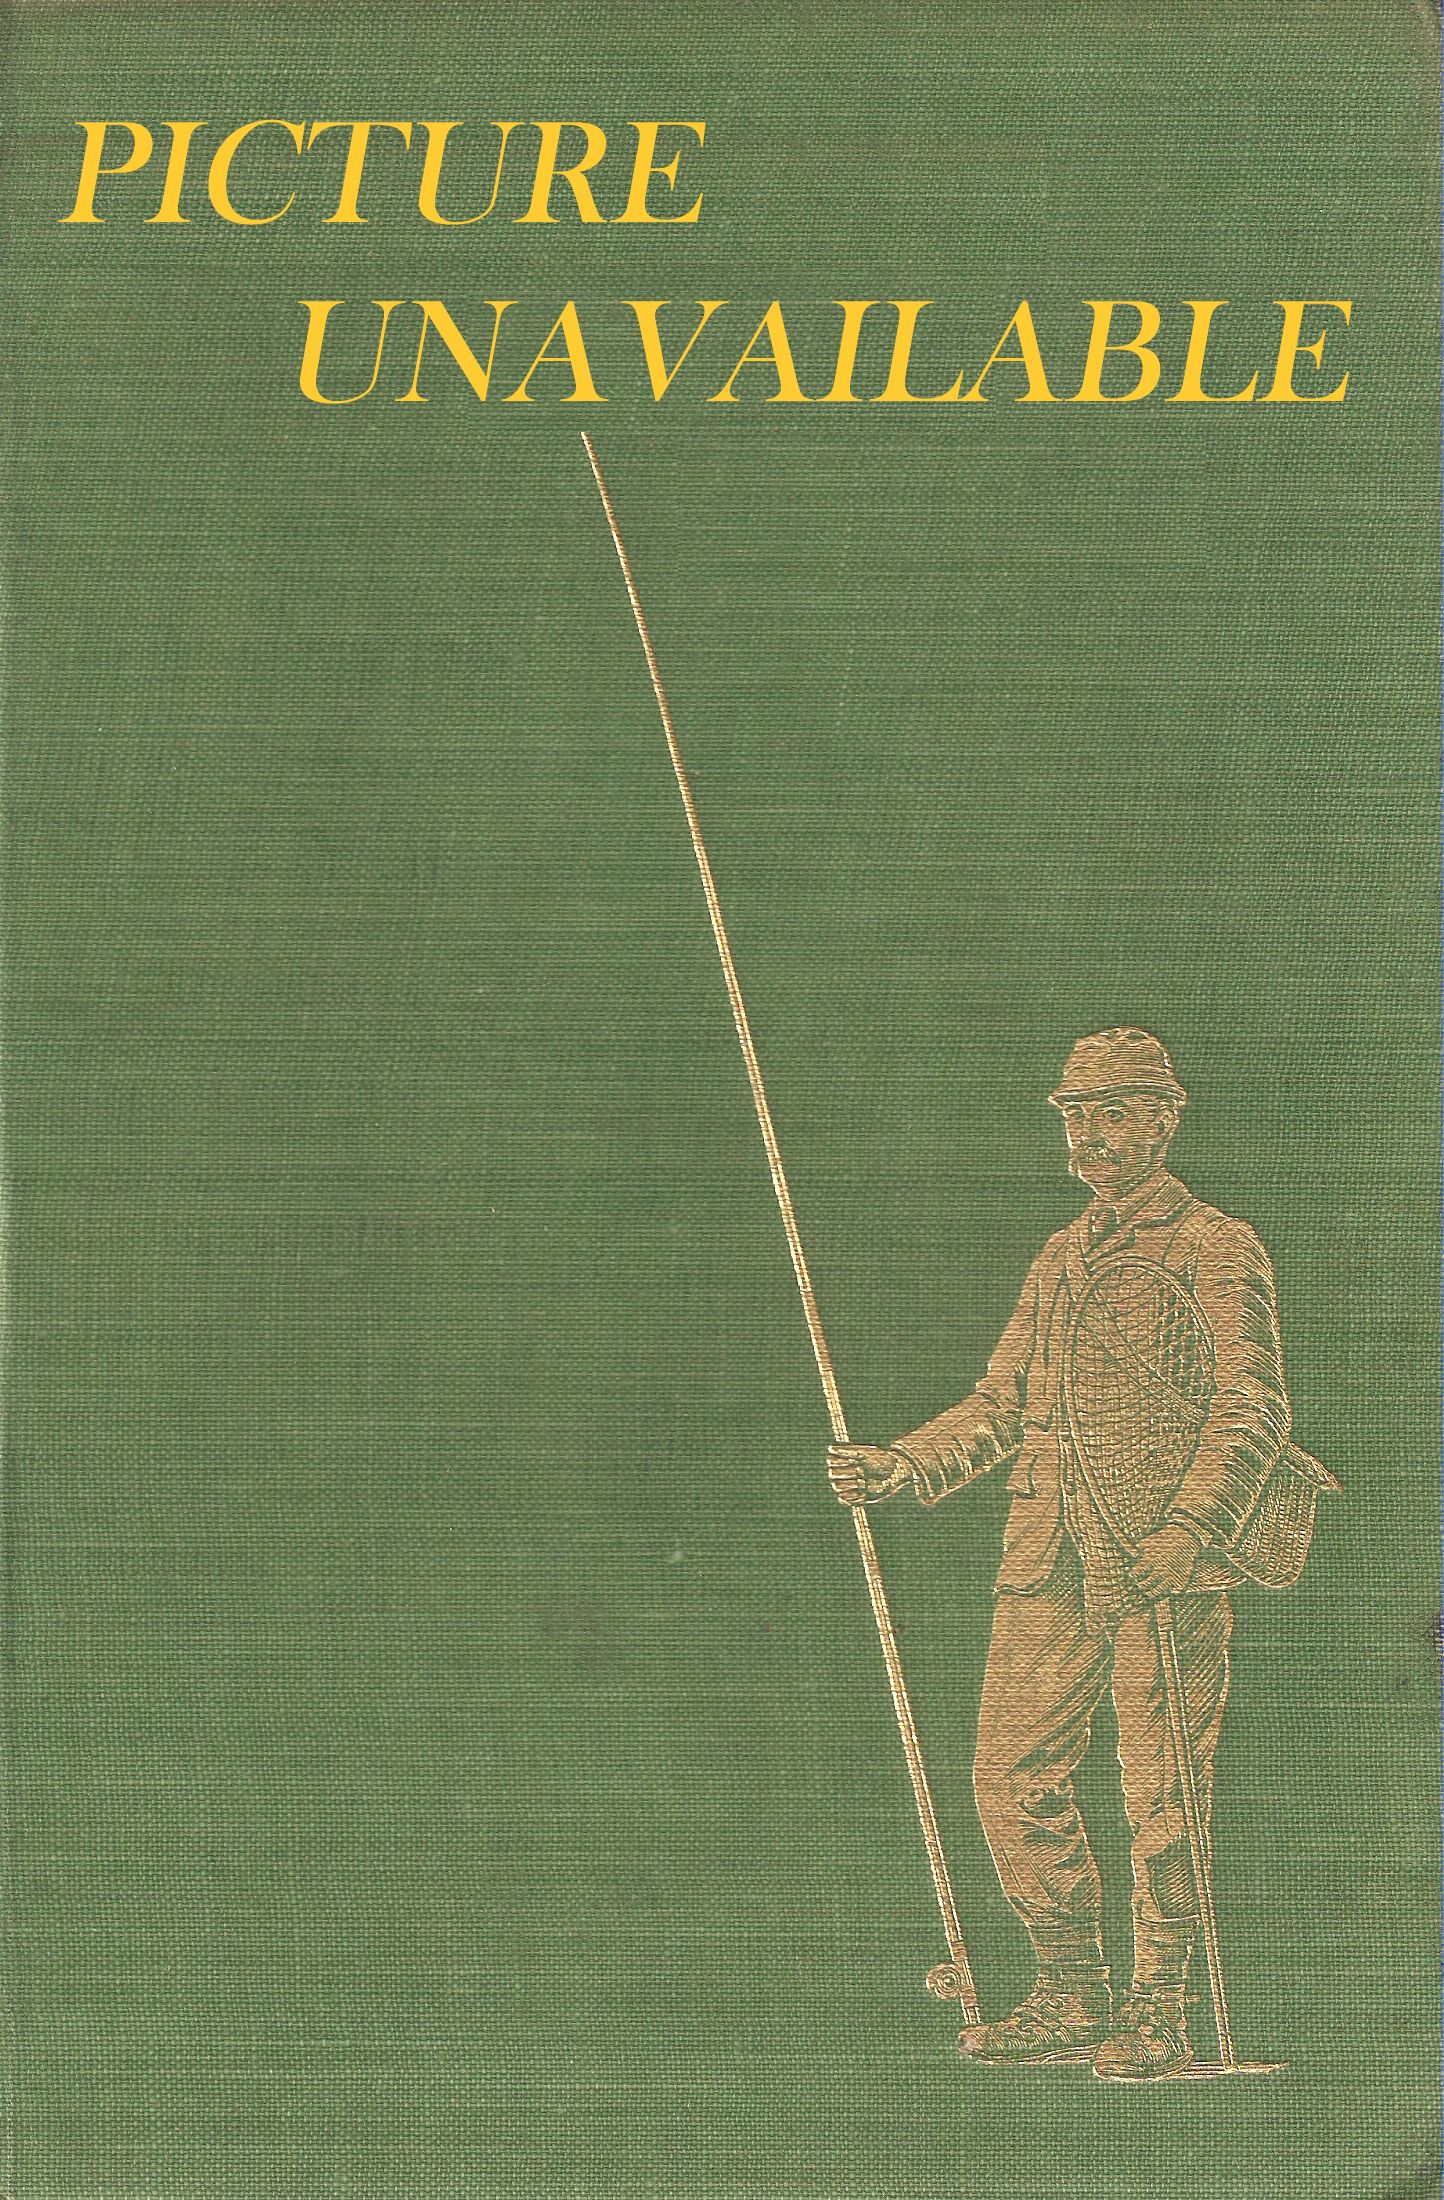 THE DRY-FLY FISHERMAN'S ENTOMOLOGY, by Martin E. Mosely, F.E.S., being a supplement to Frederic M. Halford's The Dry-Fly Man's Handbook. Reissue 1932.